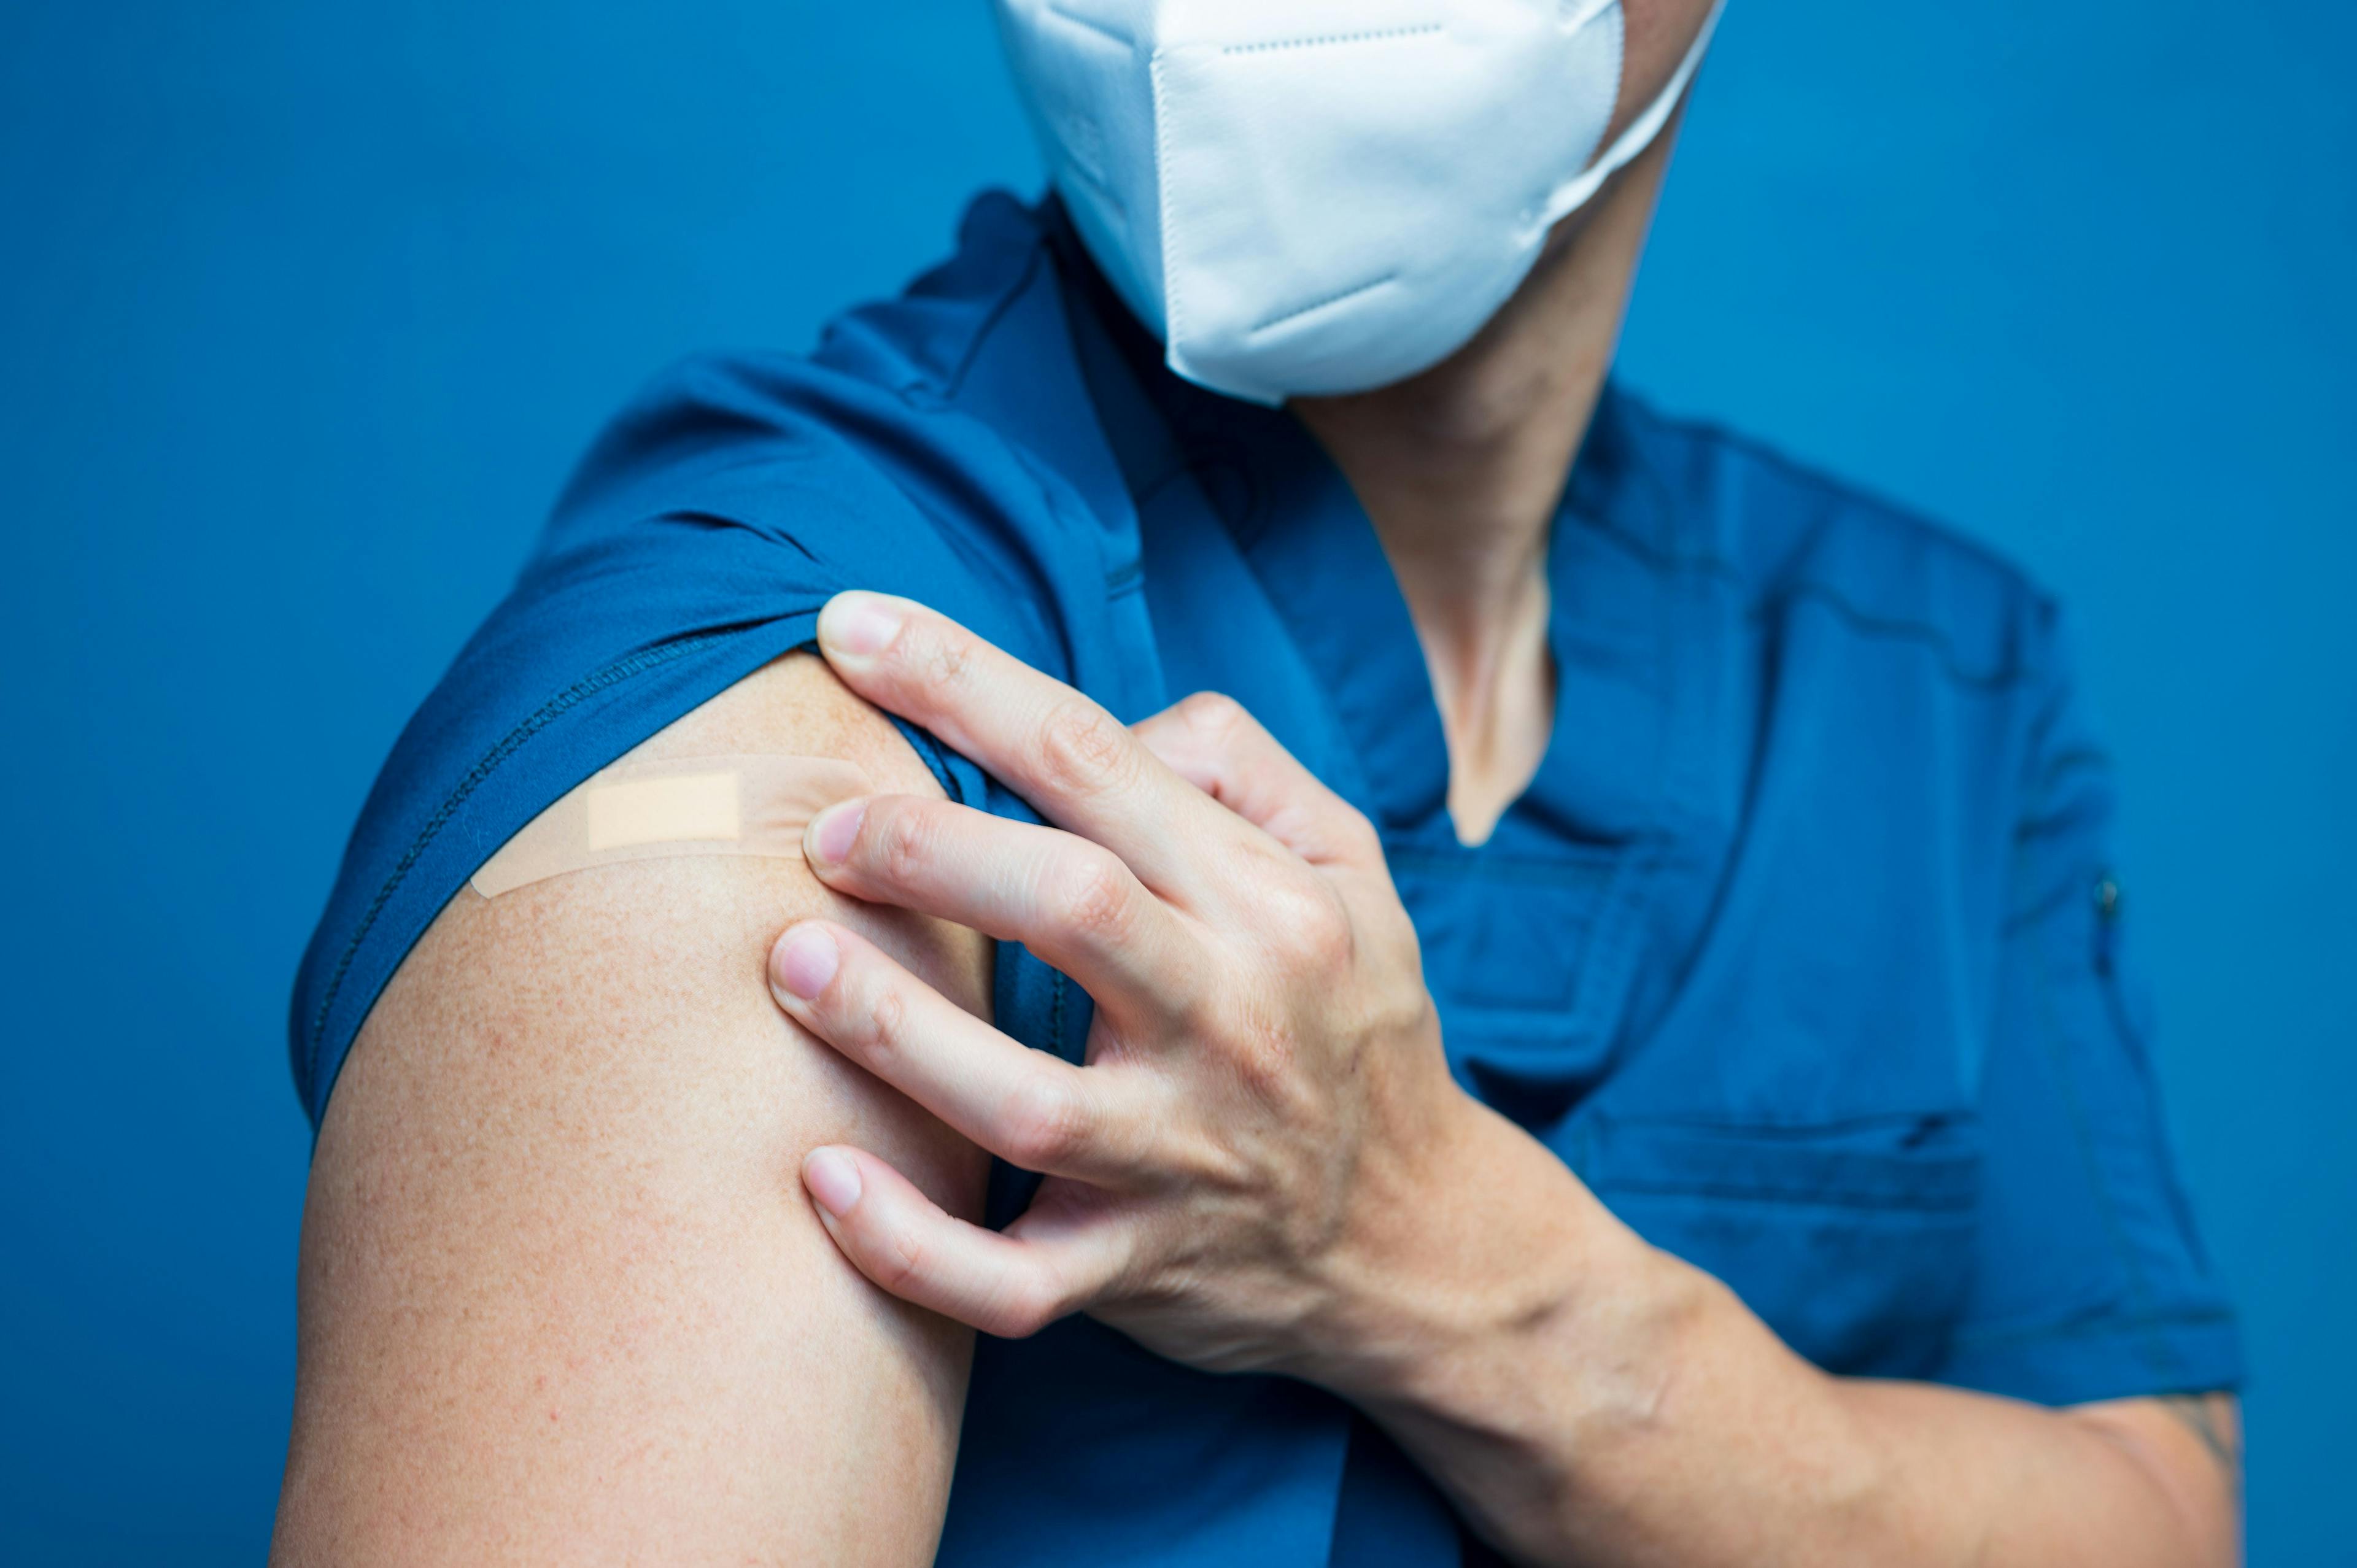 ACOG joins organizations in favor of vaccine mandates for all health care workers